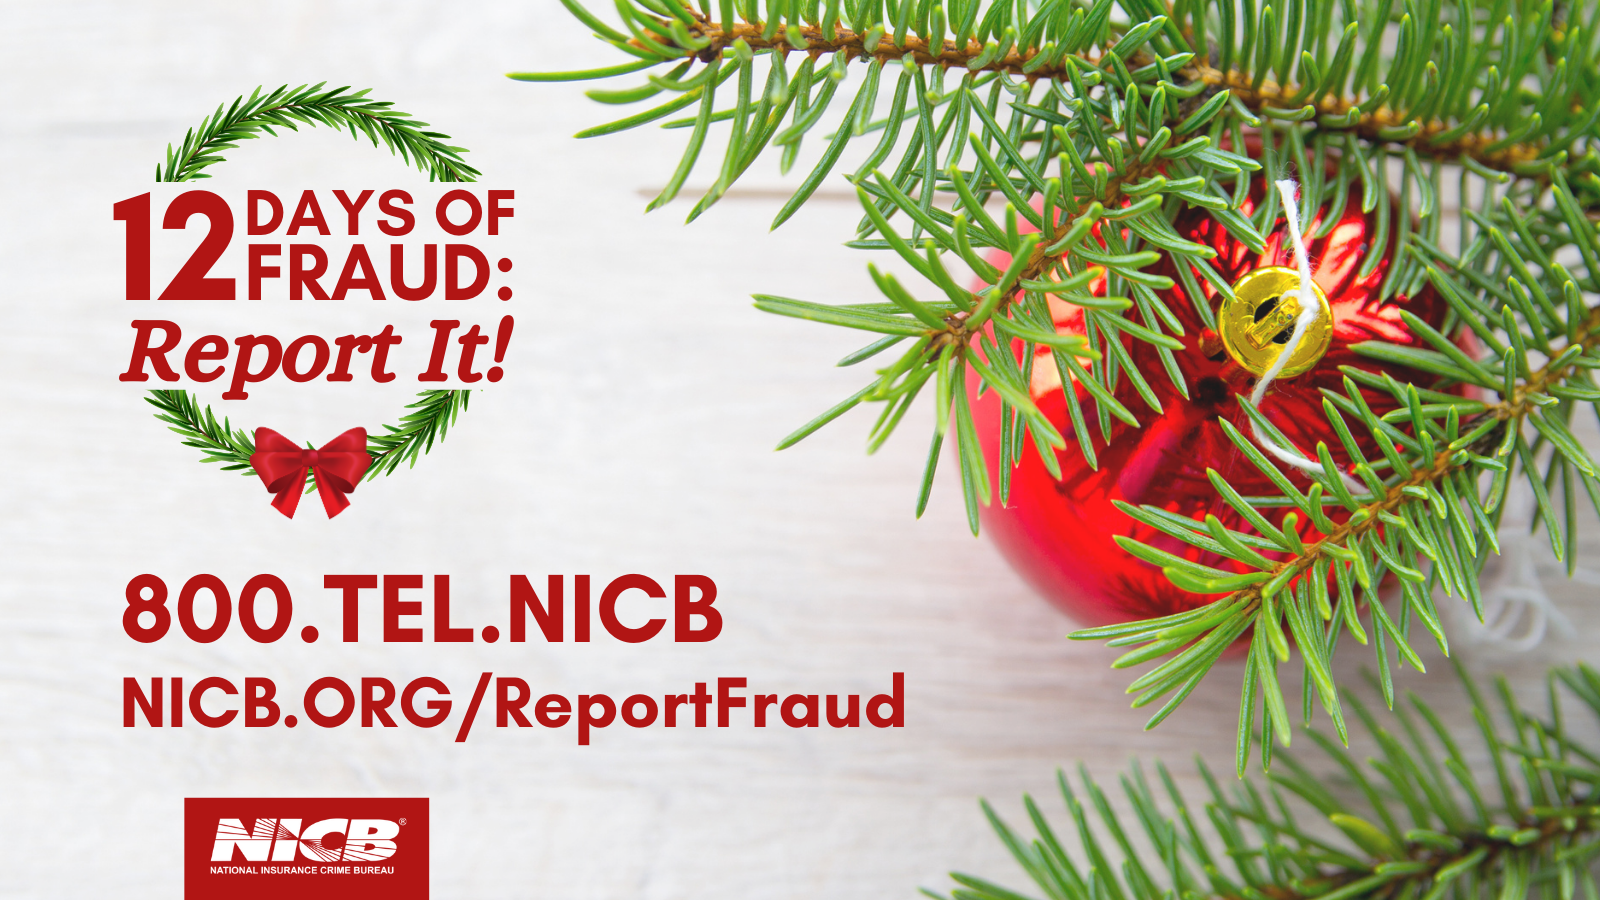 12 Days of Fraud: Day 12